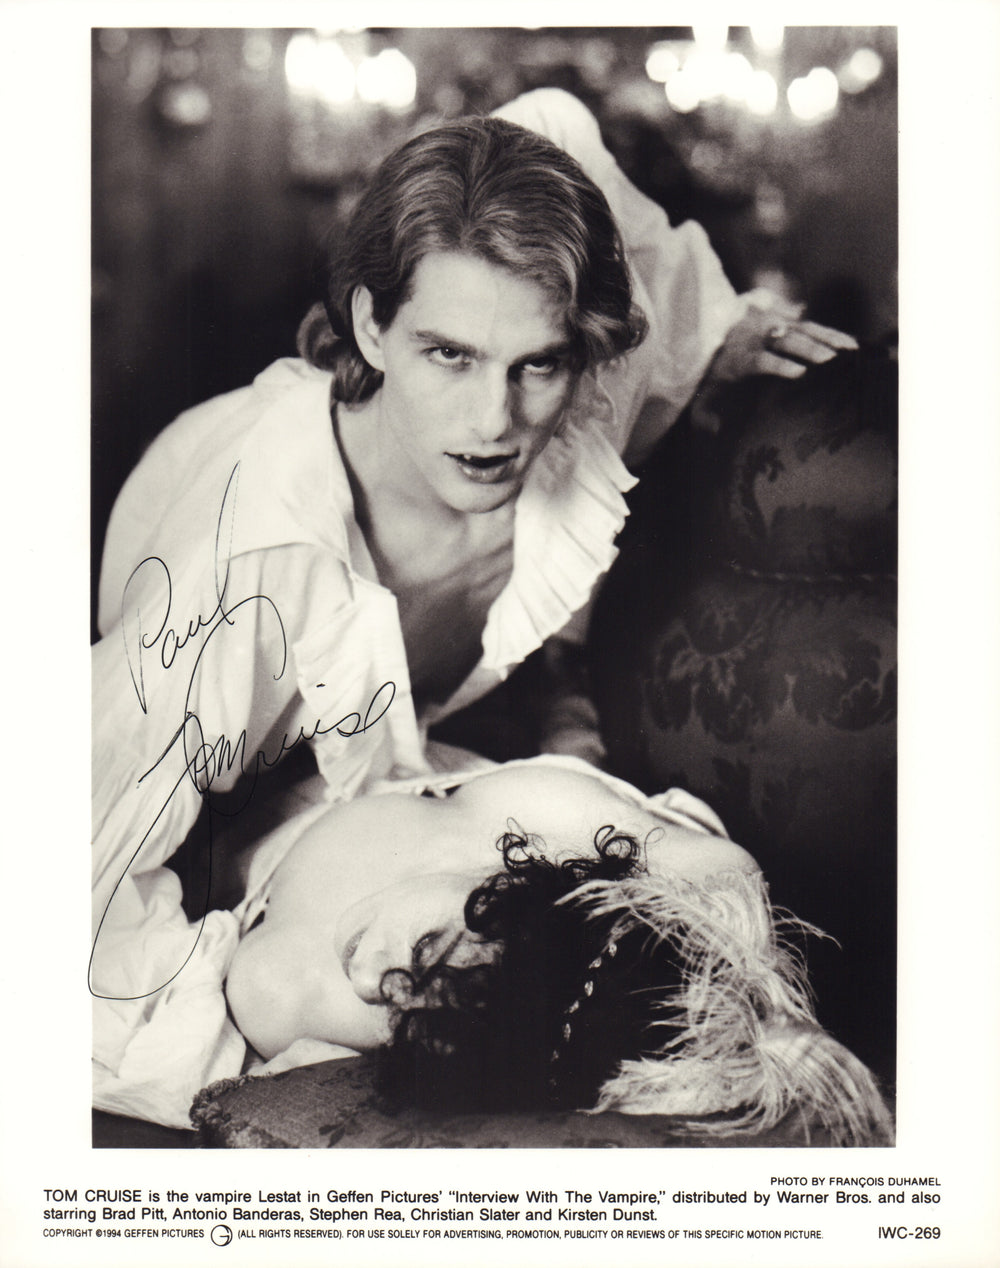 Tom Cruise as Lestat in Interview with the Vampire Signed 8x10 Photo